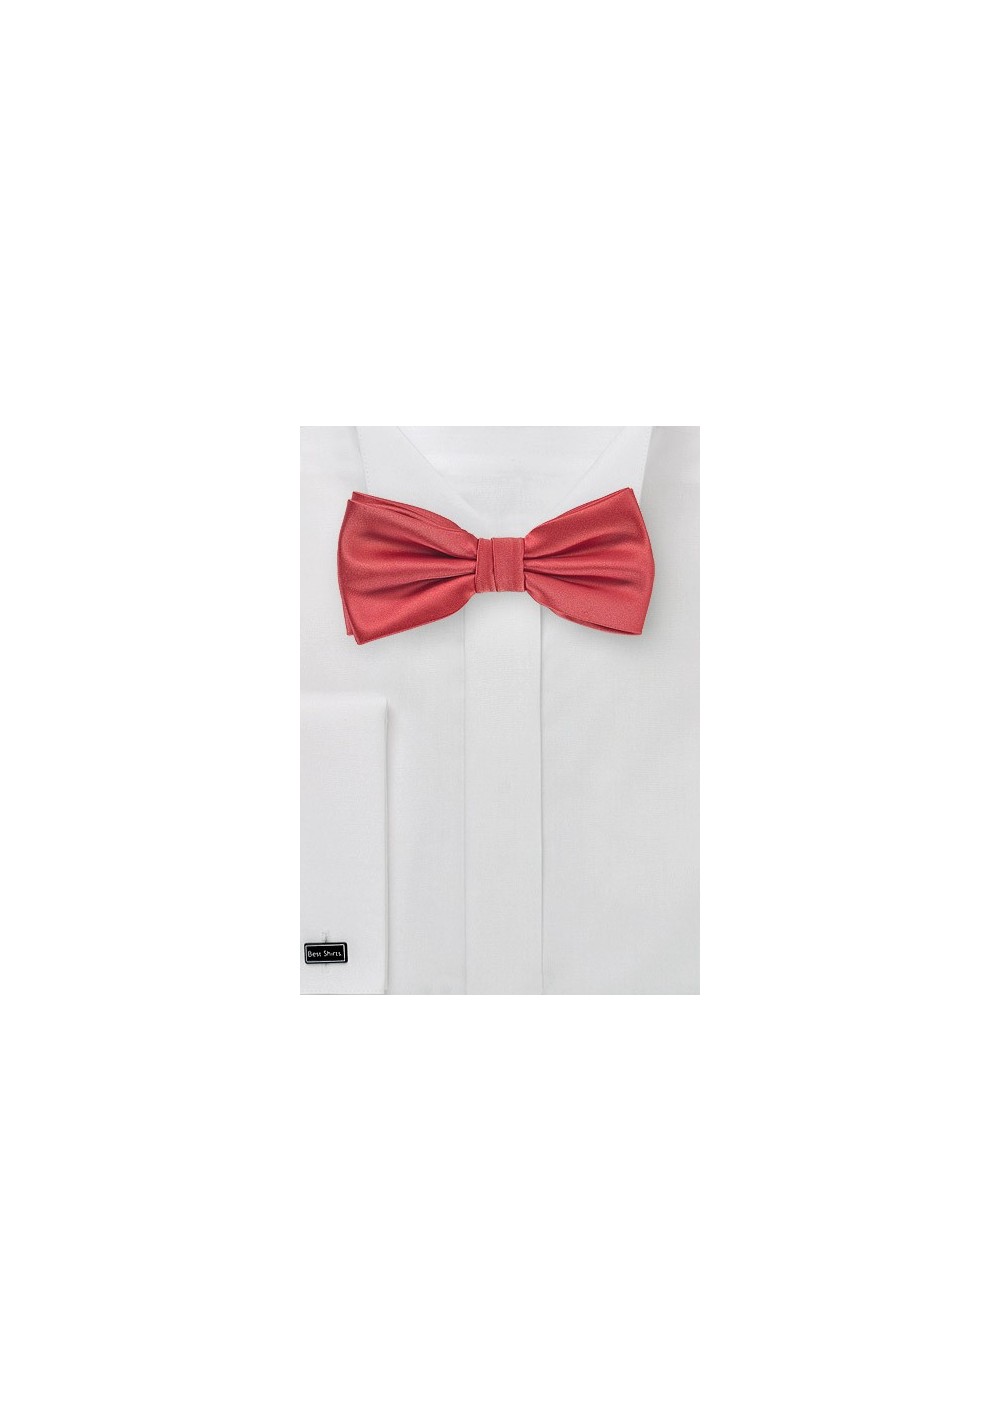 Coral Red Bow Tie